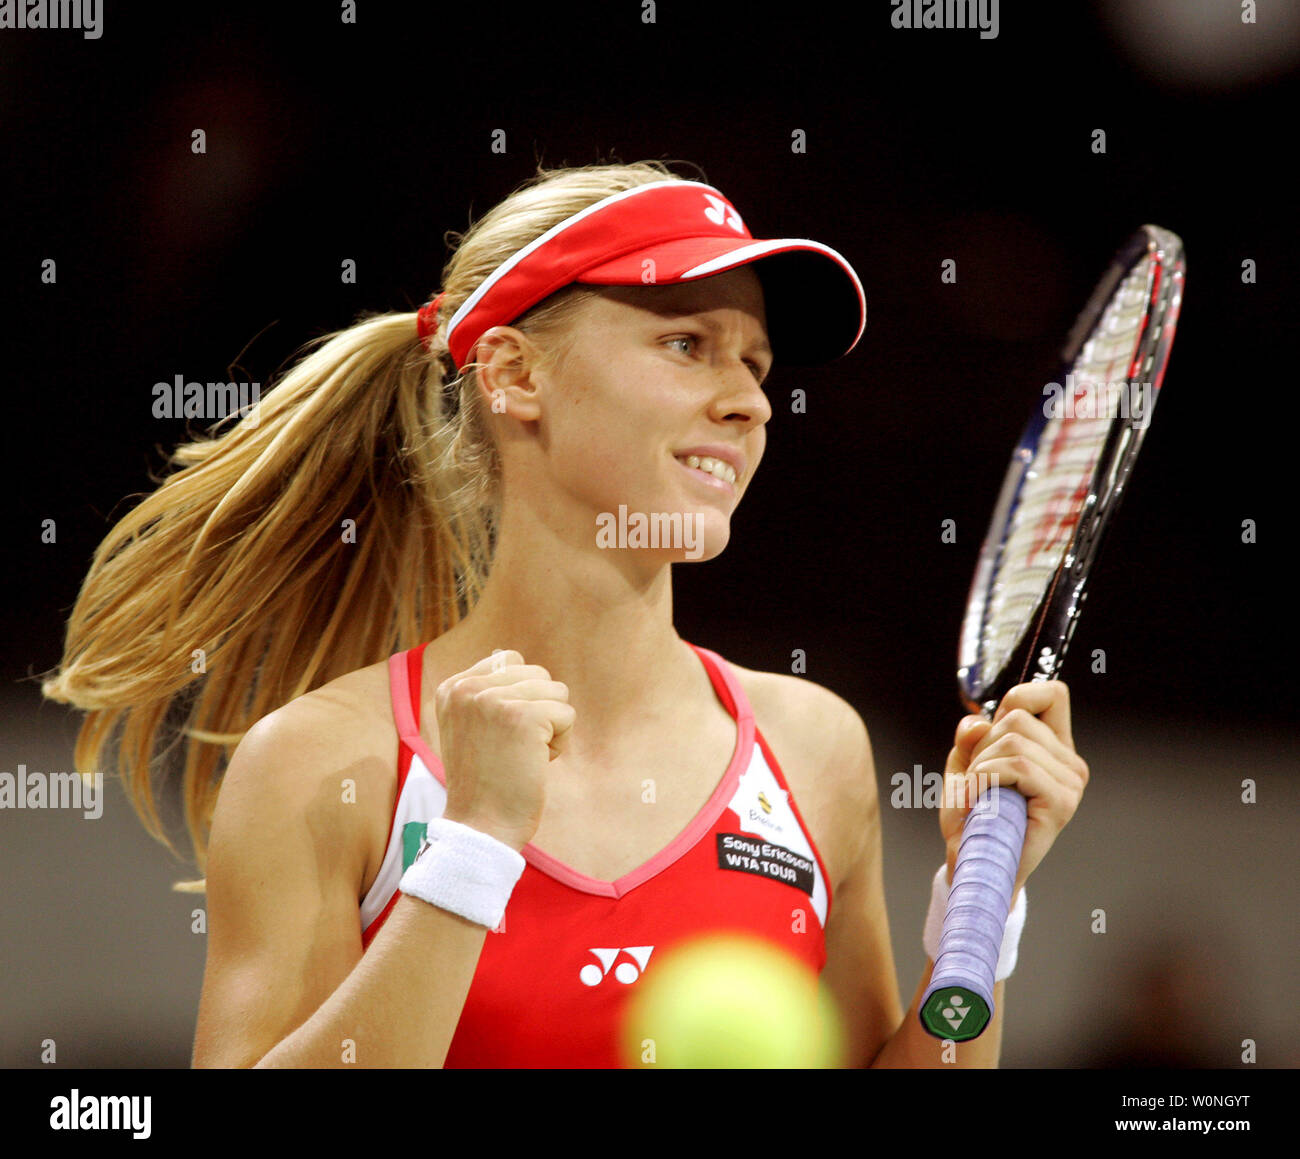 Elena Dementieva of Russia celebrates her win 5-7, 6-2, 6-4 over Nathalie  Dechy of France as the final ball bounces out at the Zurich Open, WTA  women's tennis tournament in Zurich, Switzerland